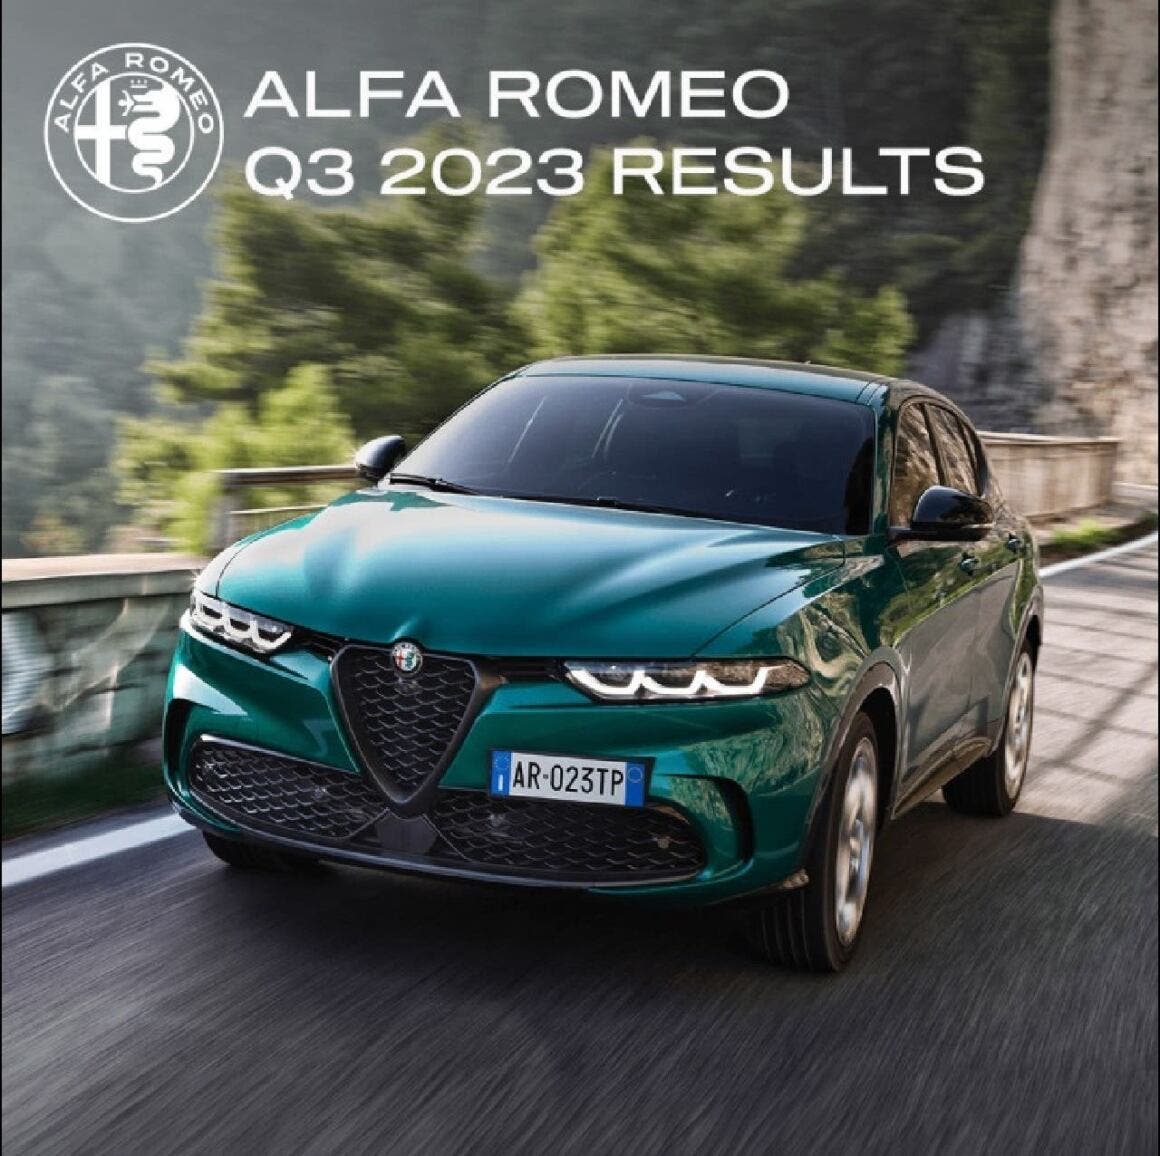 Alfa Romeo expects 2023 profit after successful turnaround